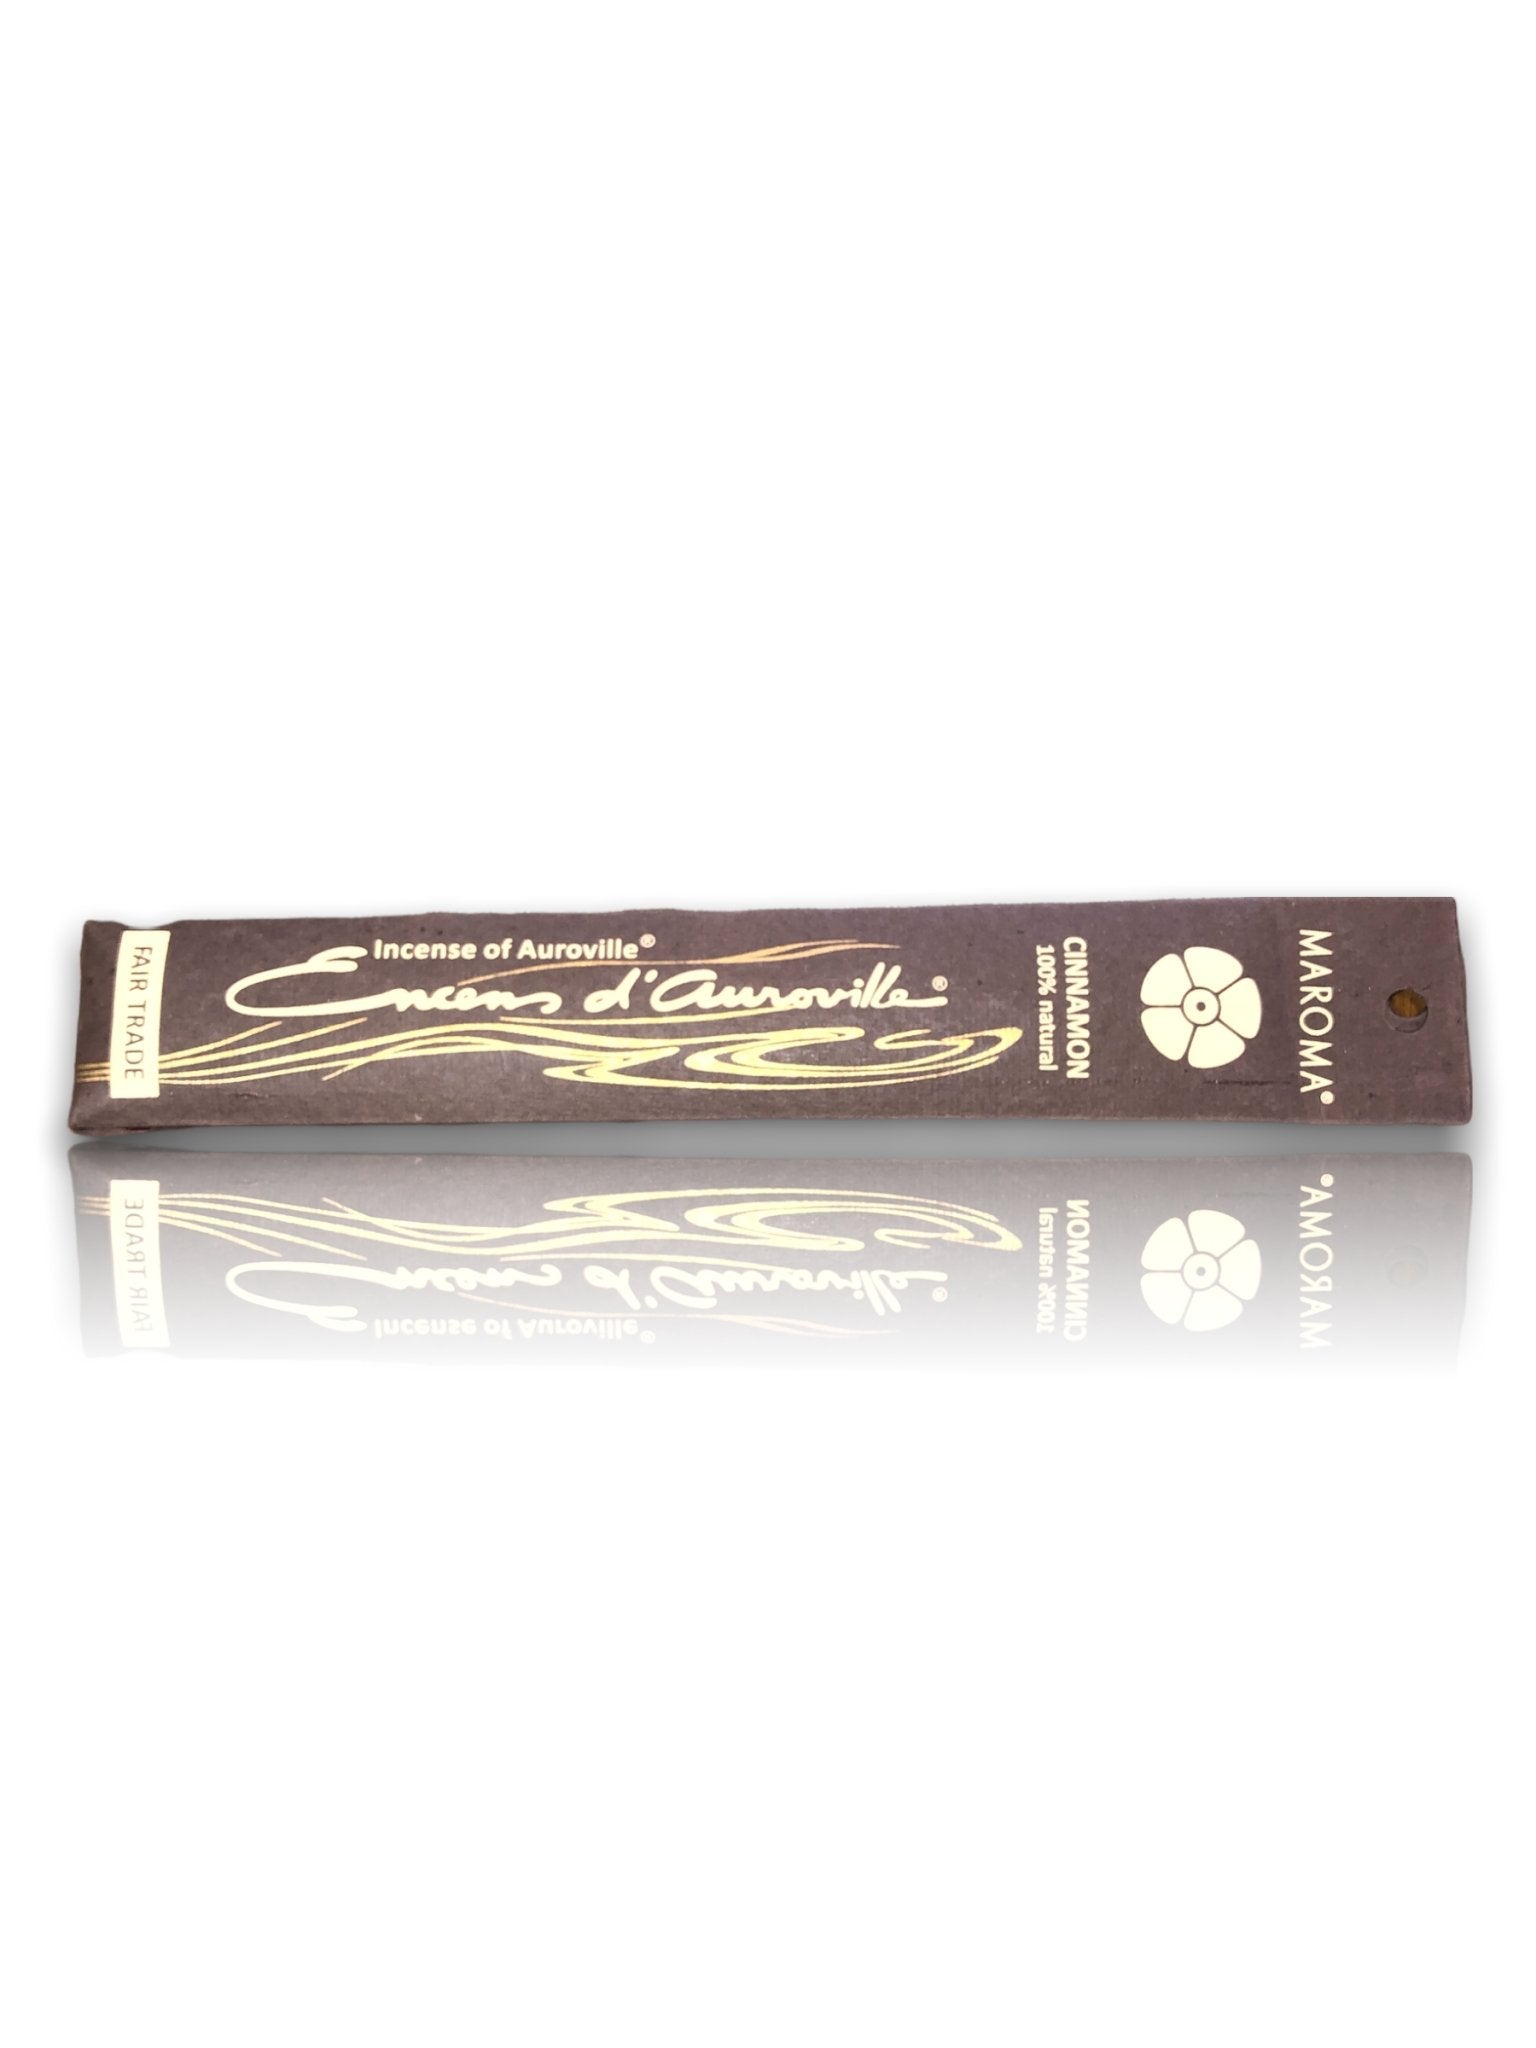 Maroma Cinnamon Incense Sticks - 10pack - HealthyLiving.ie